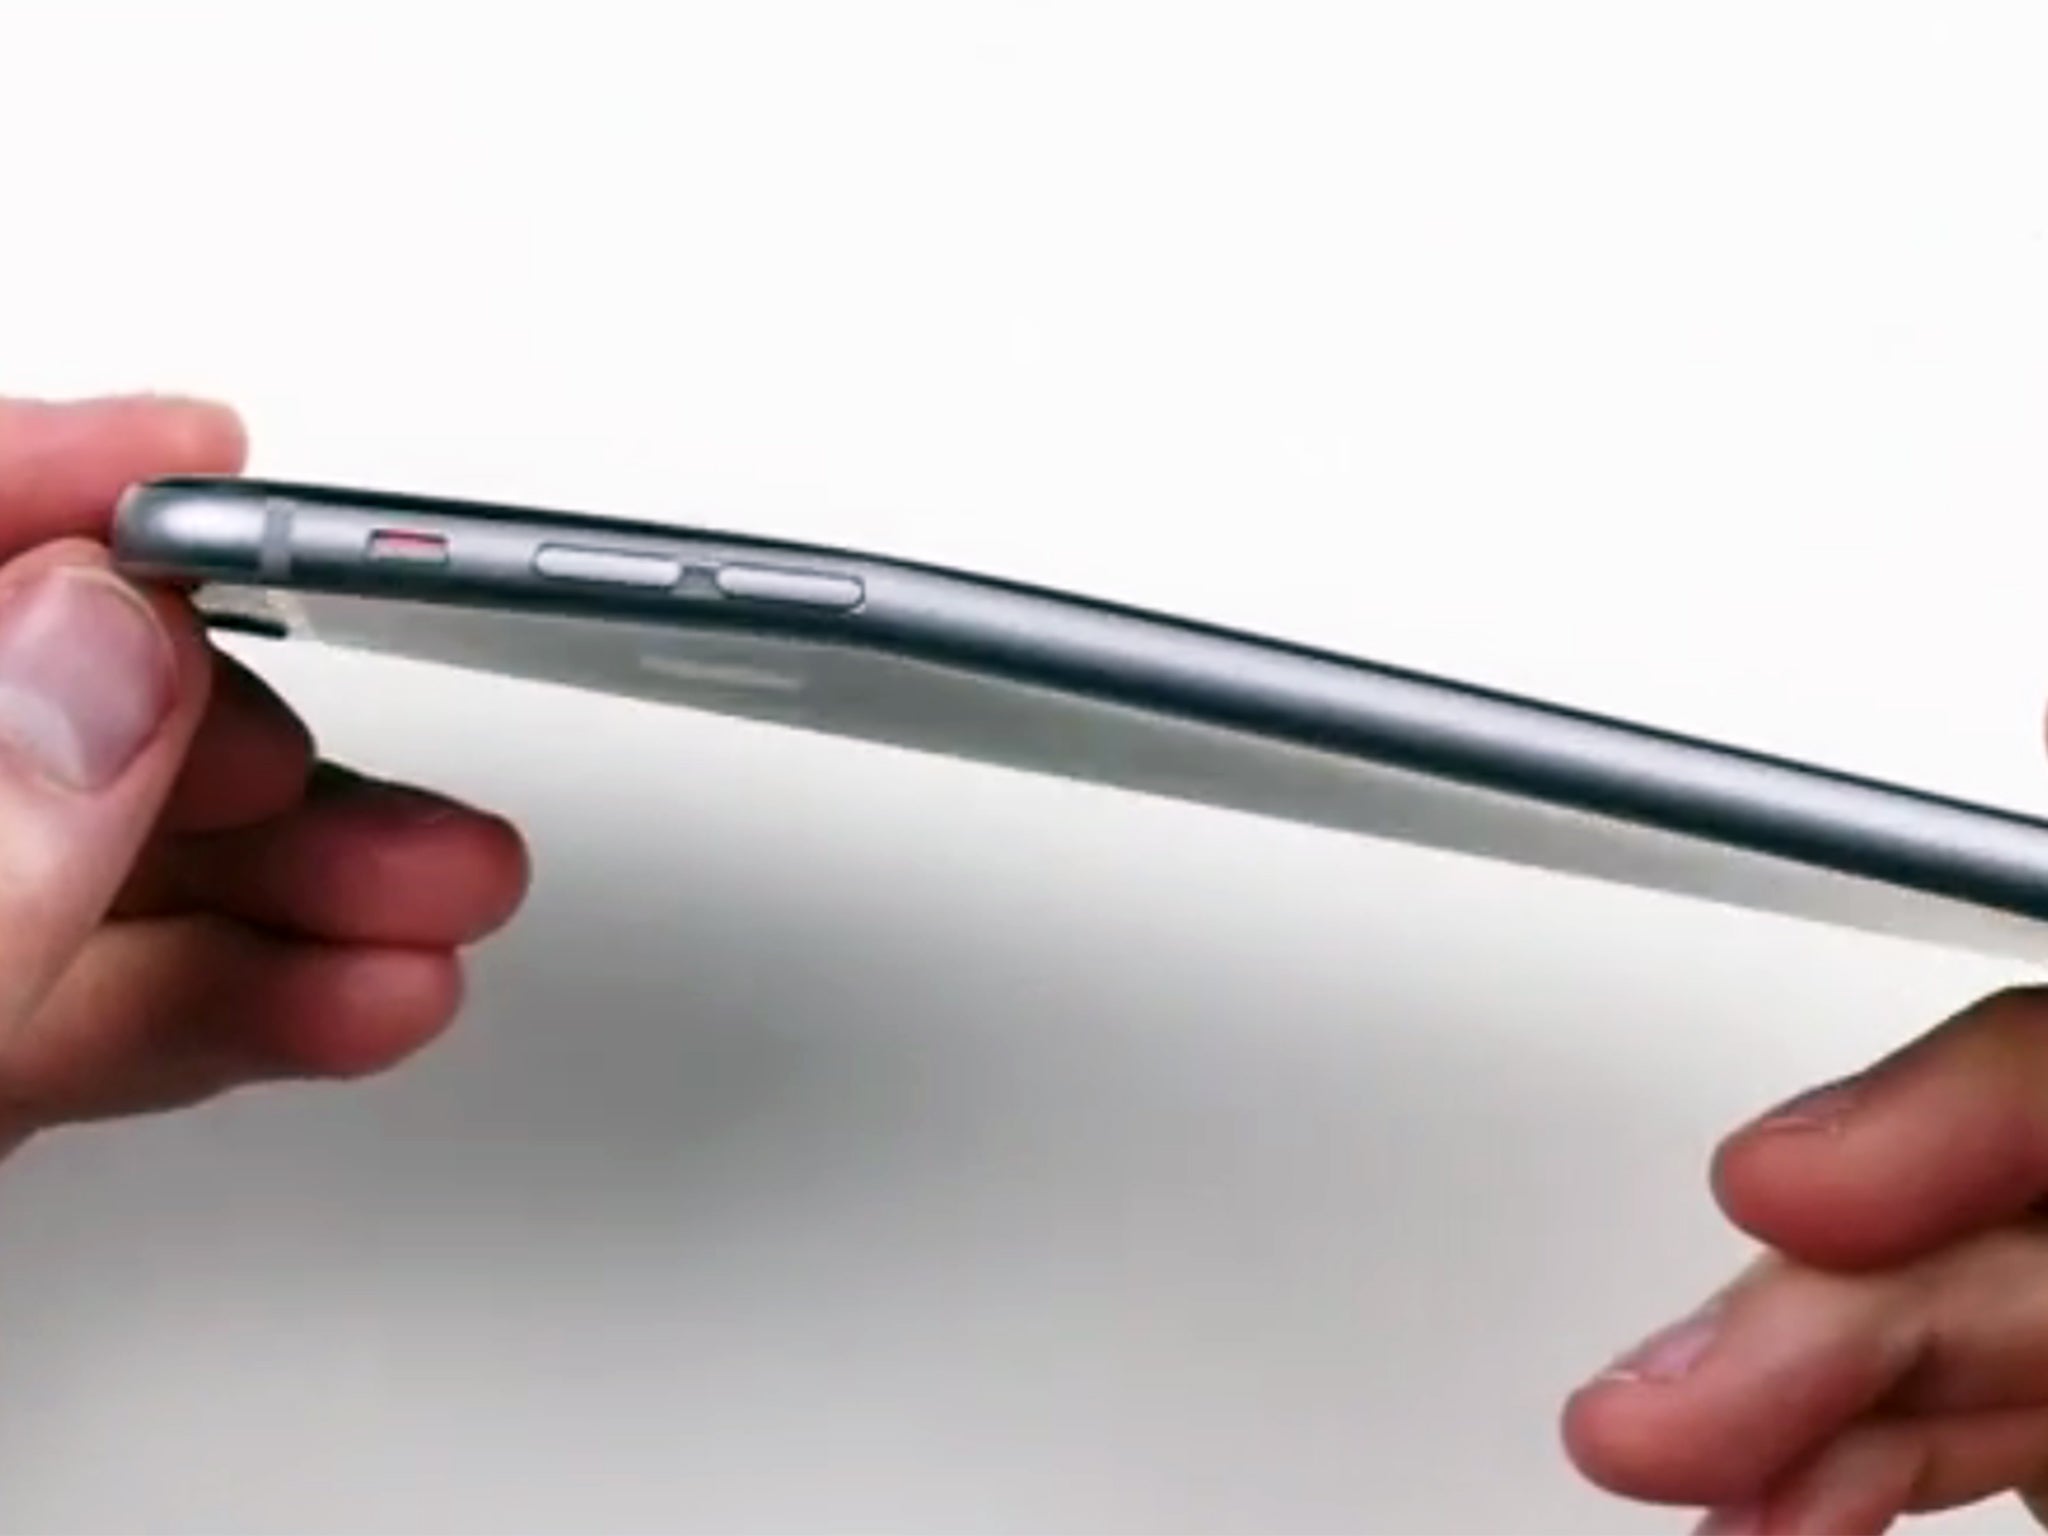 Reports of bent iPhones are probably exaggerated